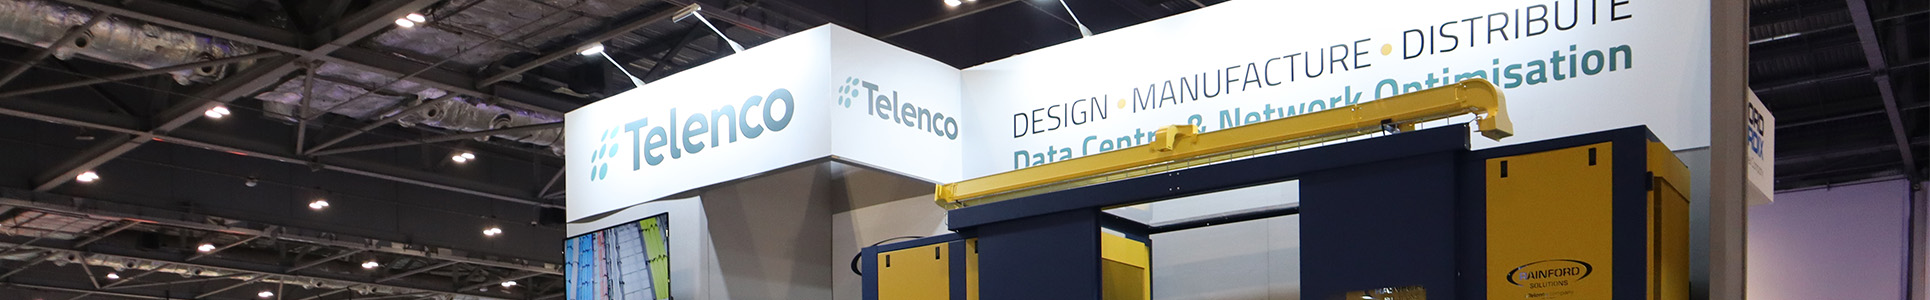 Find out more about Telenco’s data centre solutions!